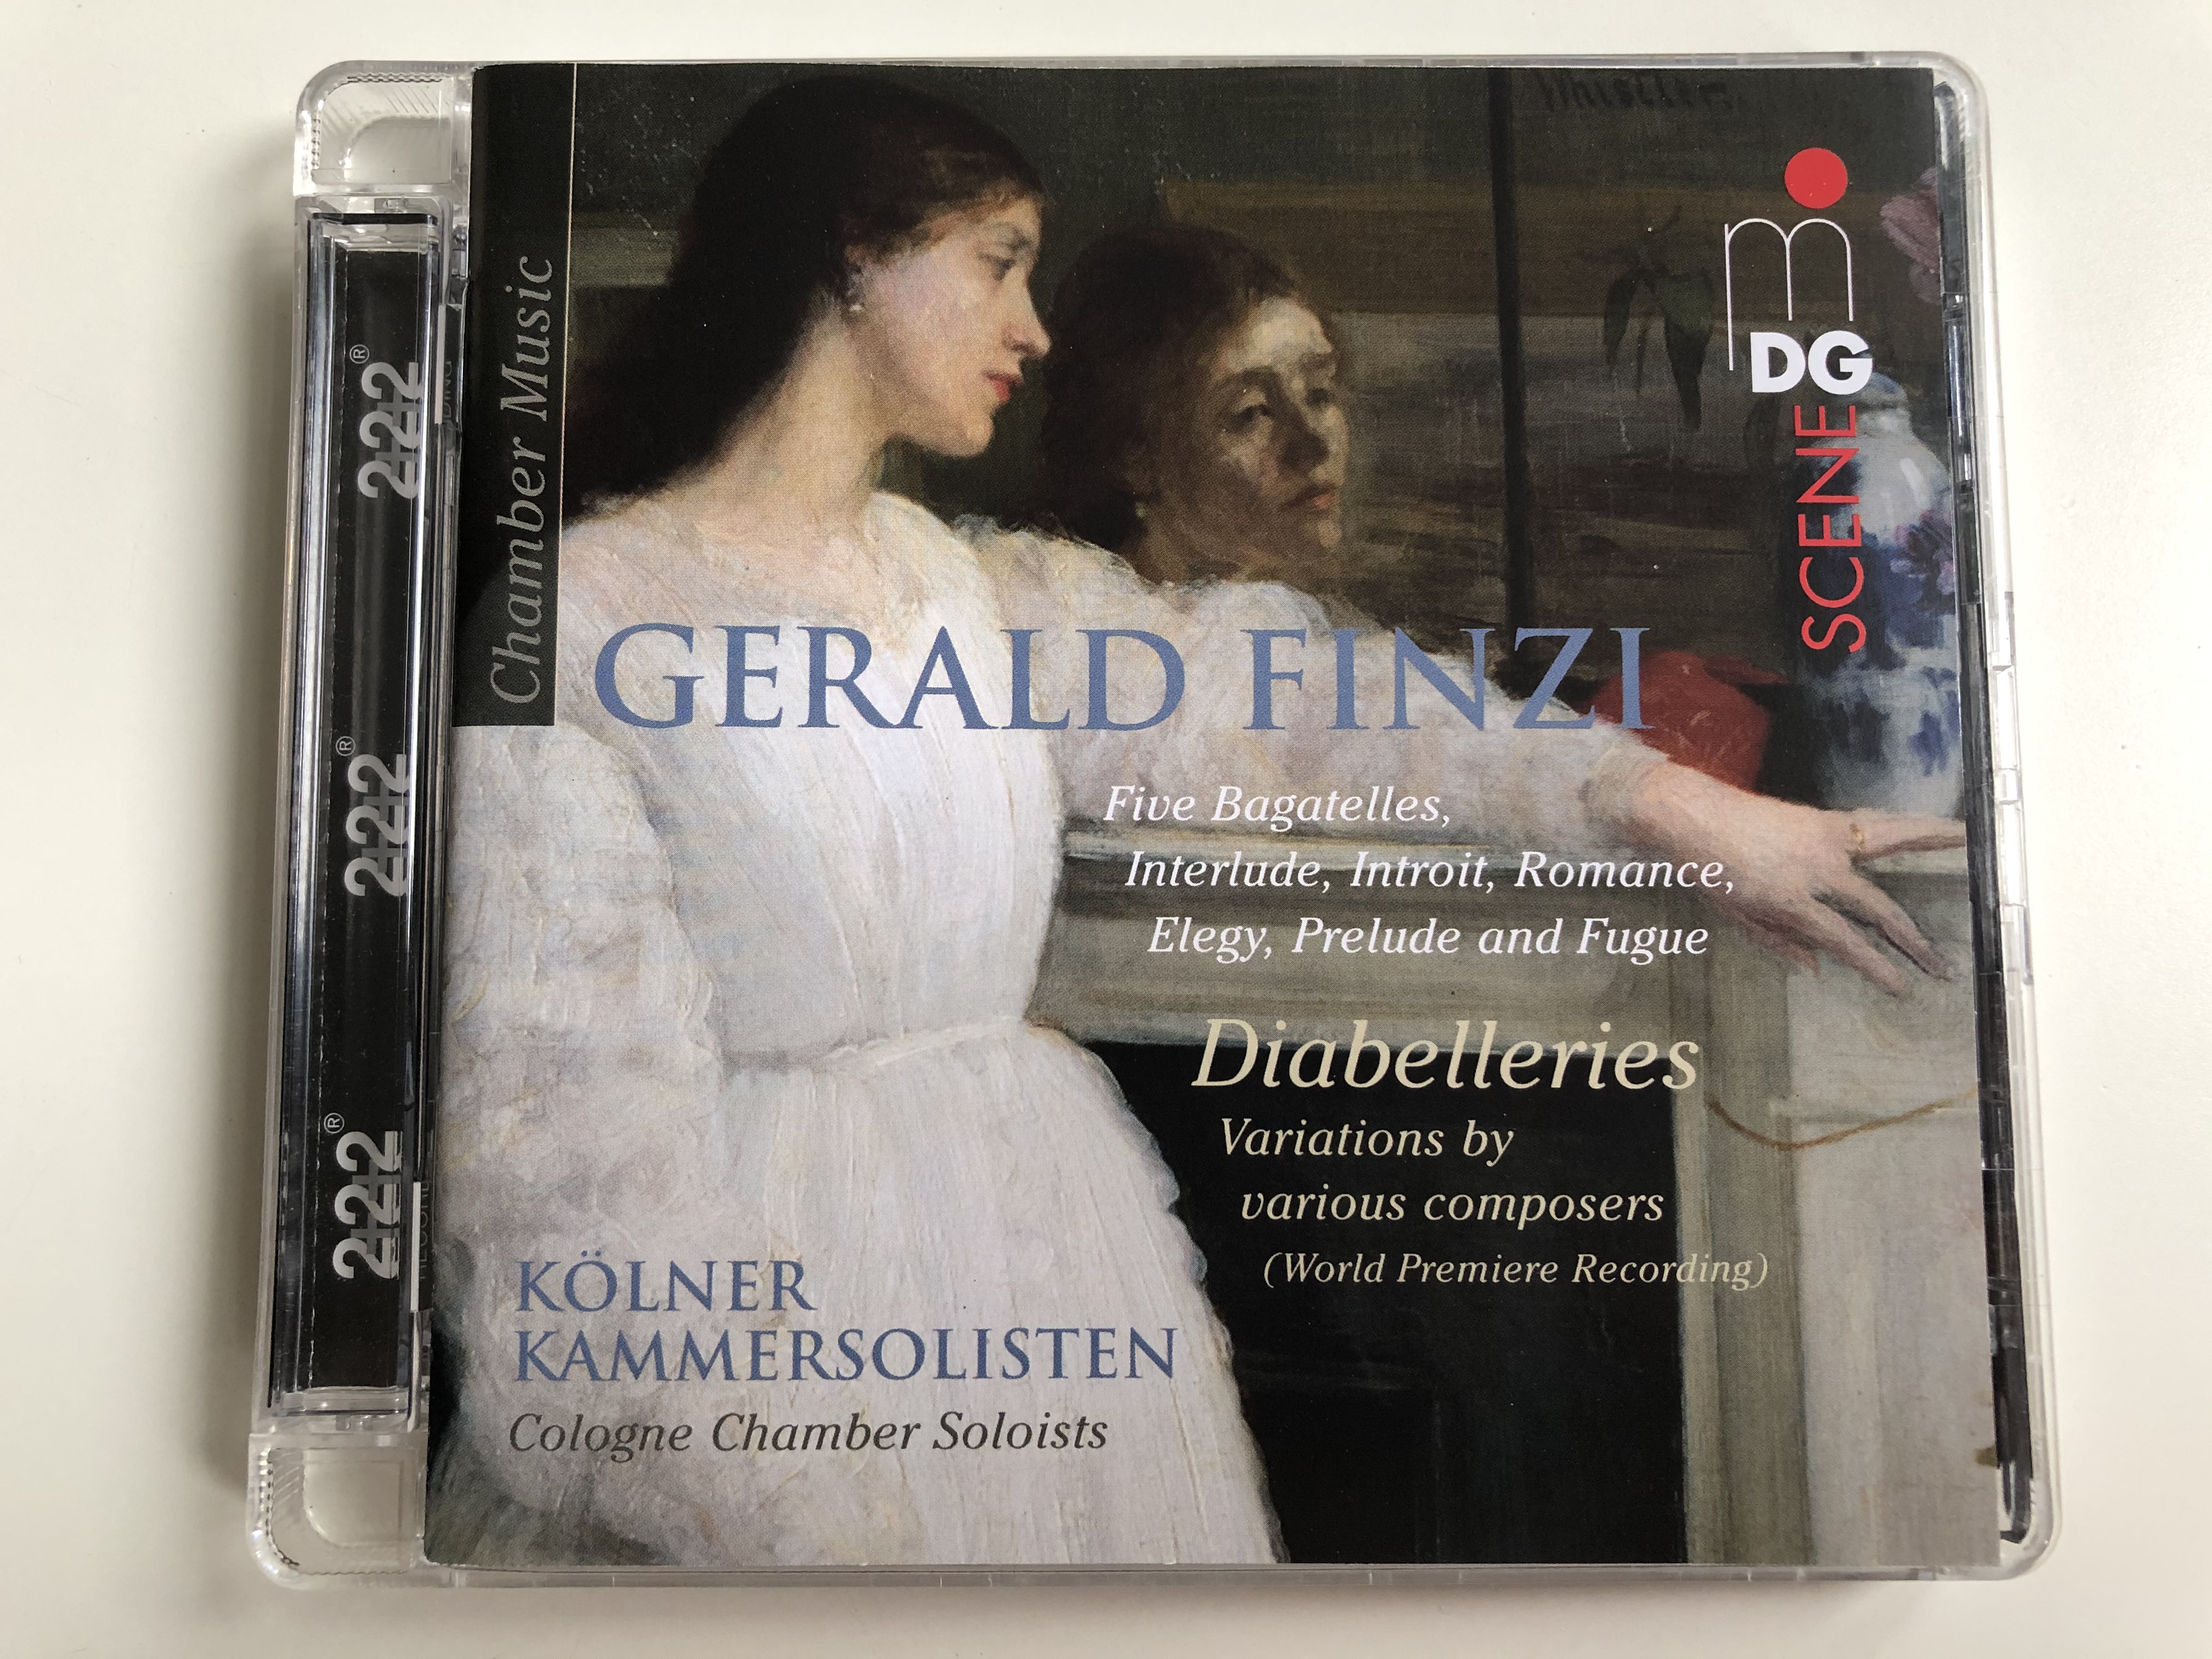 gerald-finzi-chamber-music-kolner-kammersolisten-cologne-chamber-soloists-five-bagatelles-interlude-introit-romance-elegy-prelude-and-fugue-diabelleries-variations-by-various-composer-1-.jpg